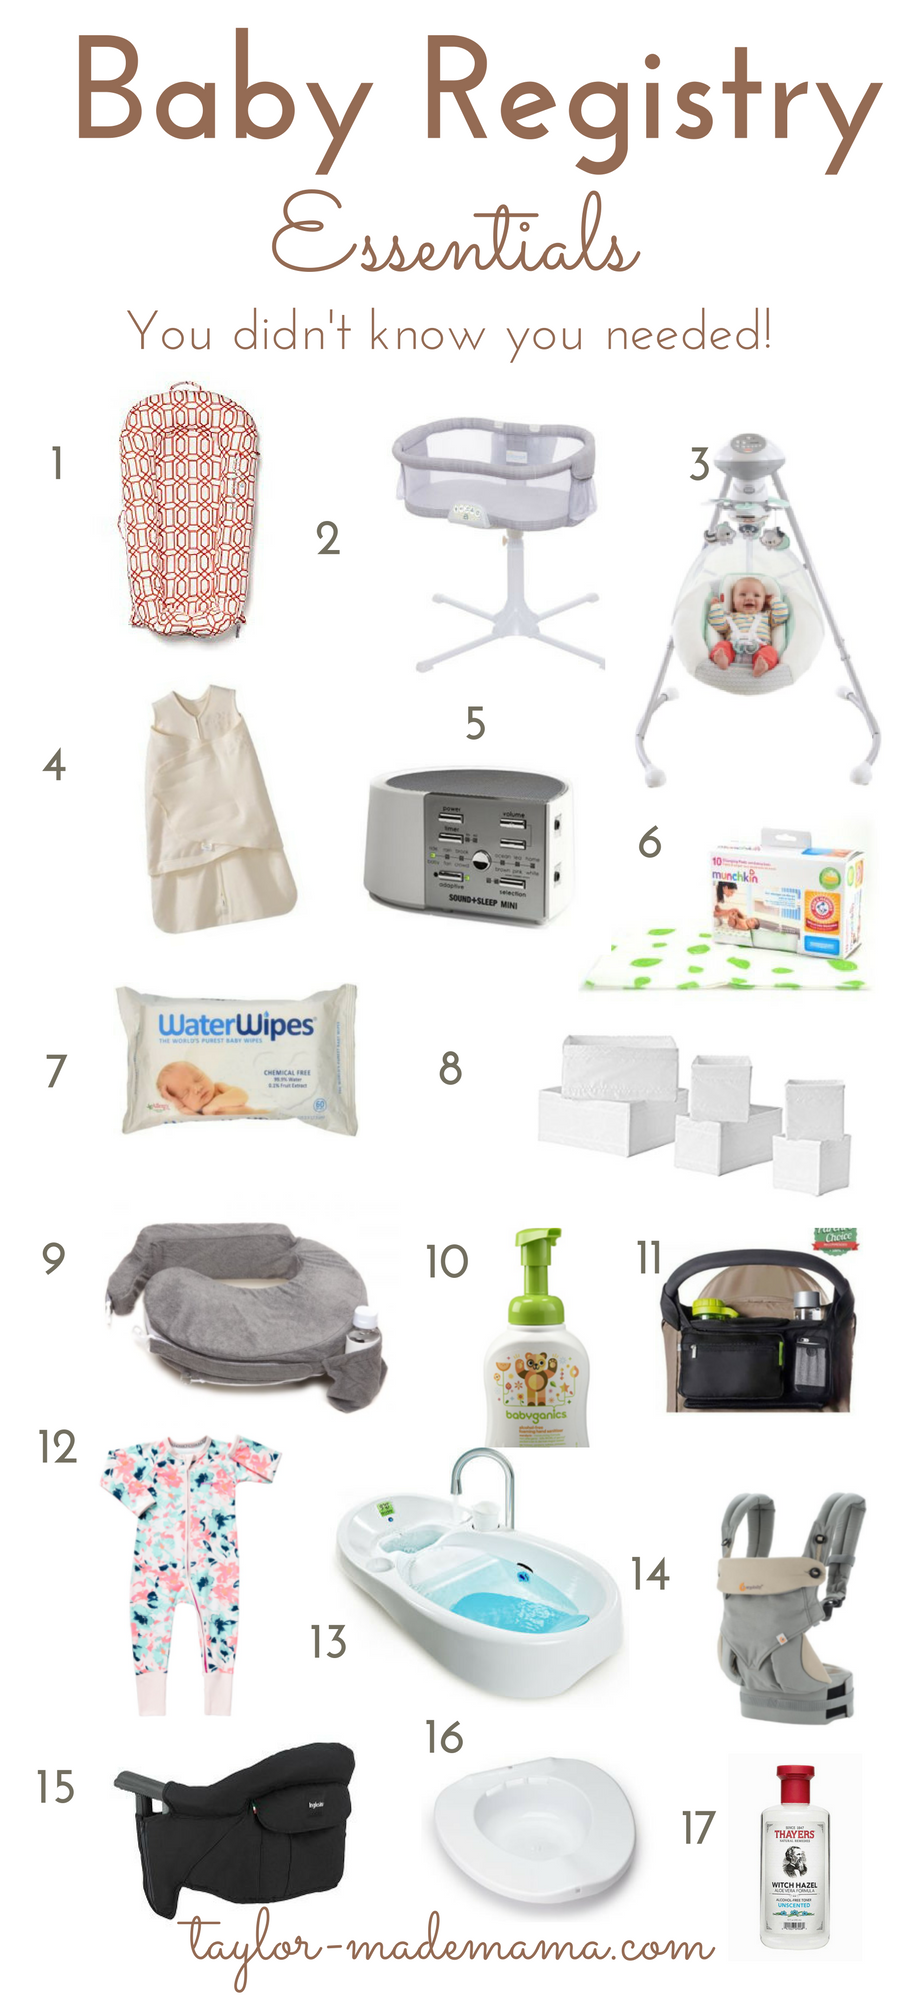 Newborn Baby Essentials: 60 Must Have Items For Every Baby